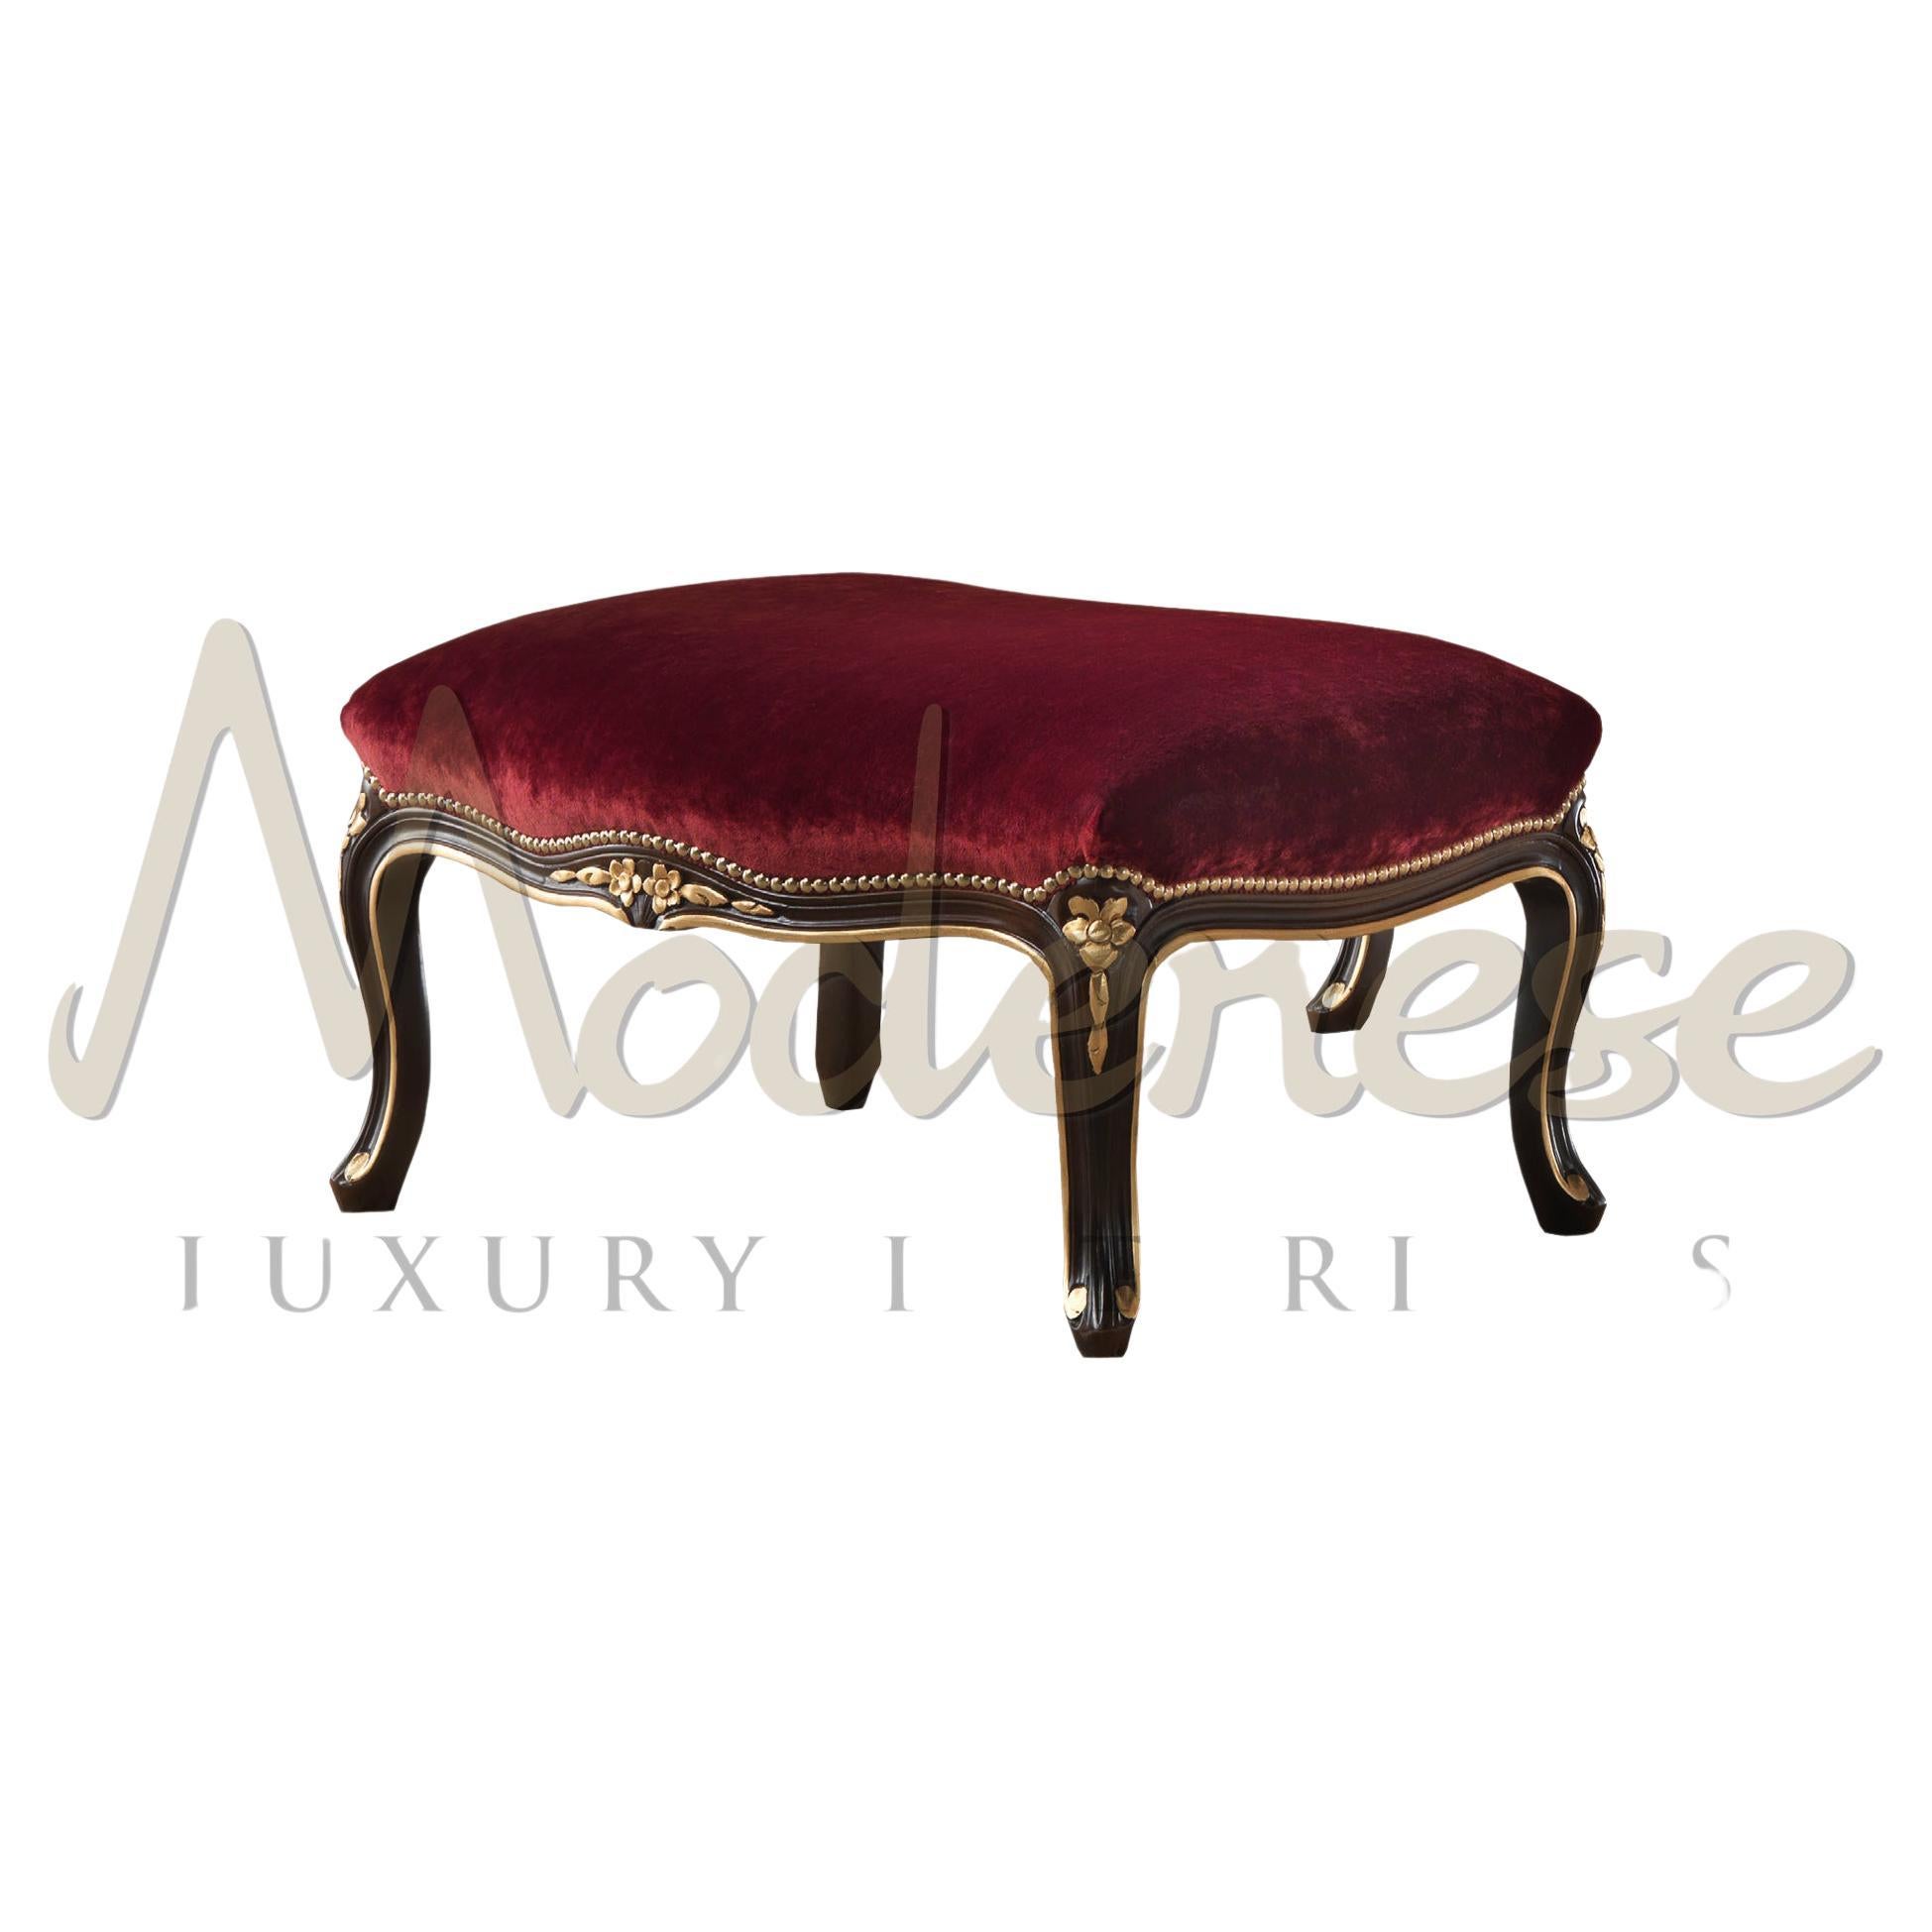 Use your freetime wisely and confortably: rest your feet on the soft, delicate upholstery featured in this elegant footstool from Modenese Interiors, high-end furniture producer from Padova, Italy. This particular item presents a classic red